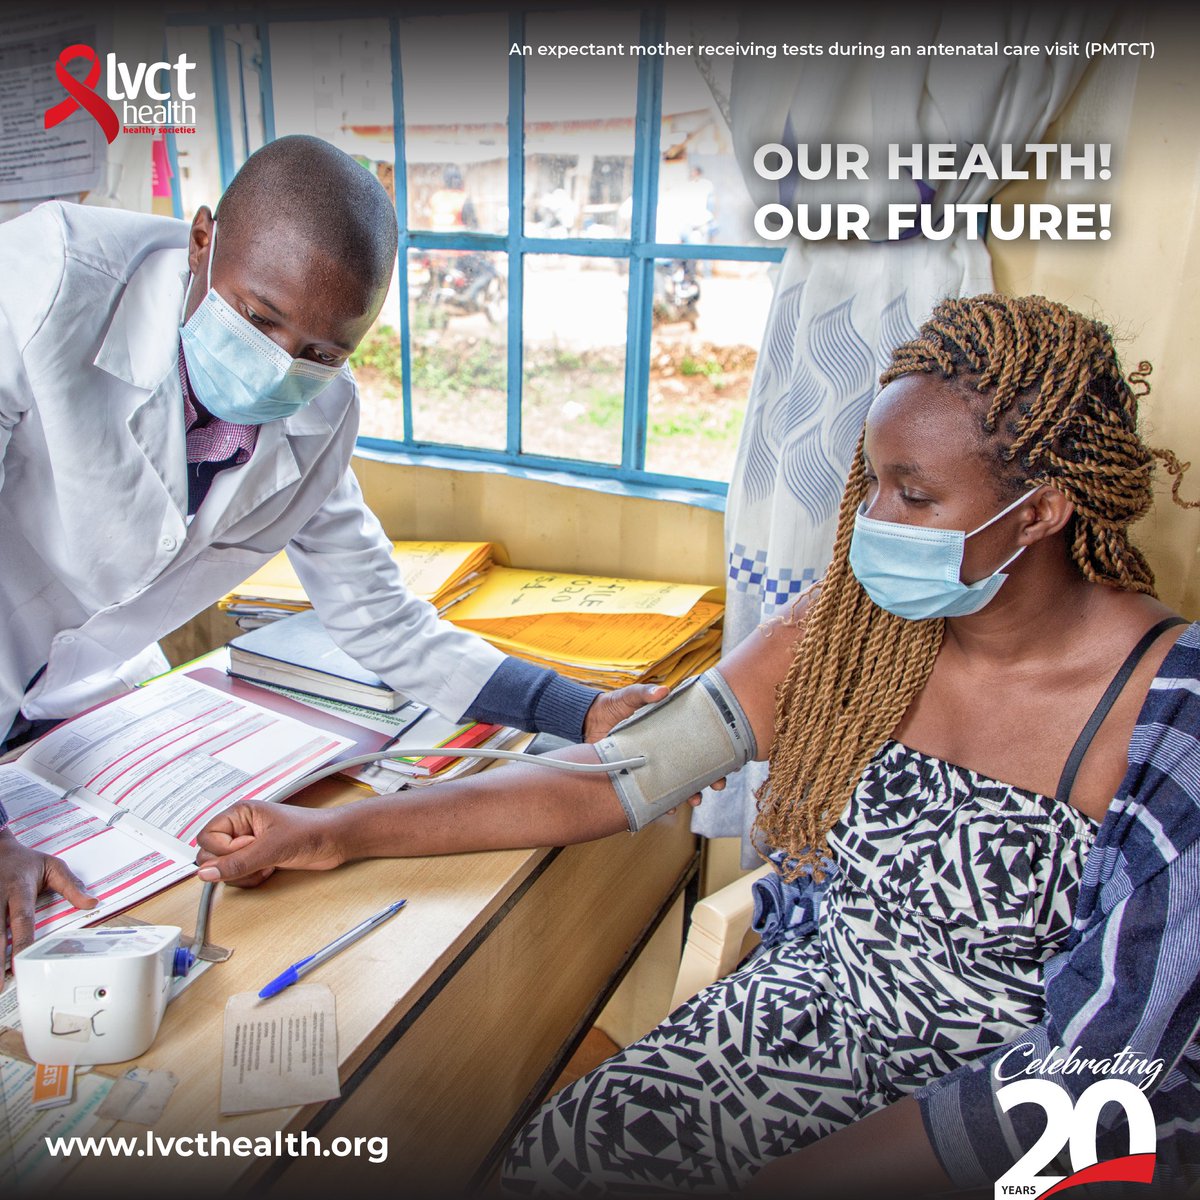 Over the years we have made it possible for mothers living with HIV to access life-saving anti-retroviral treatment, essential for managing HIV and preventing mother-to-child transmission during pregnancy and childbirth.
#HealthyMothers
#EndHIV
#LVCTat20
#20YearsofImpact